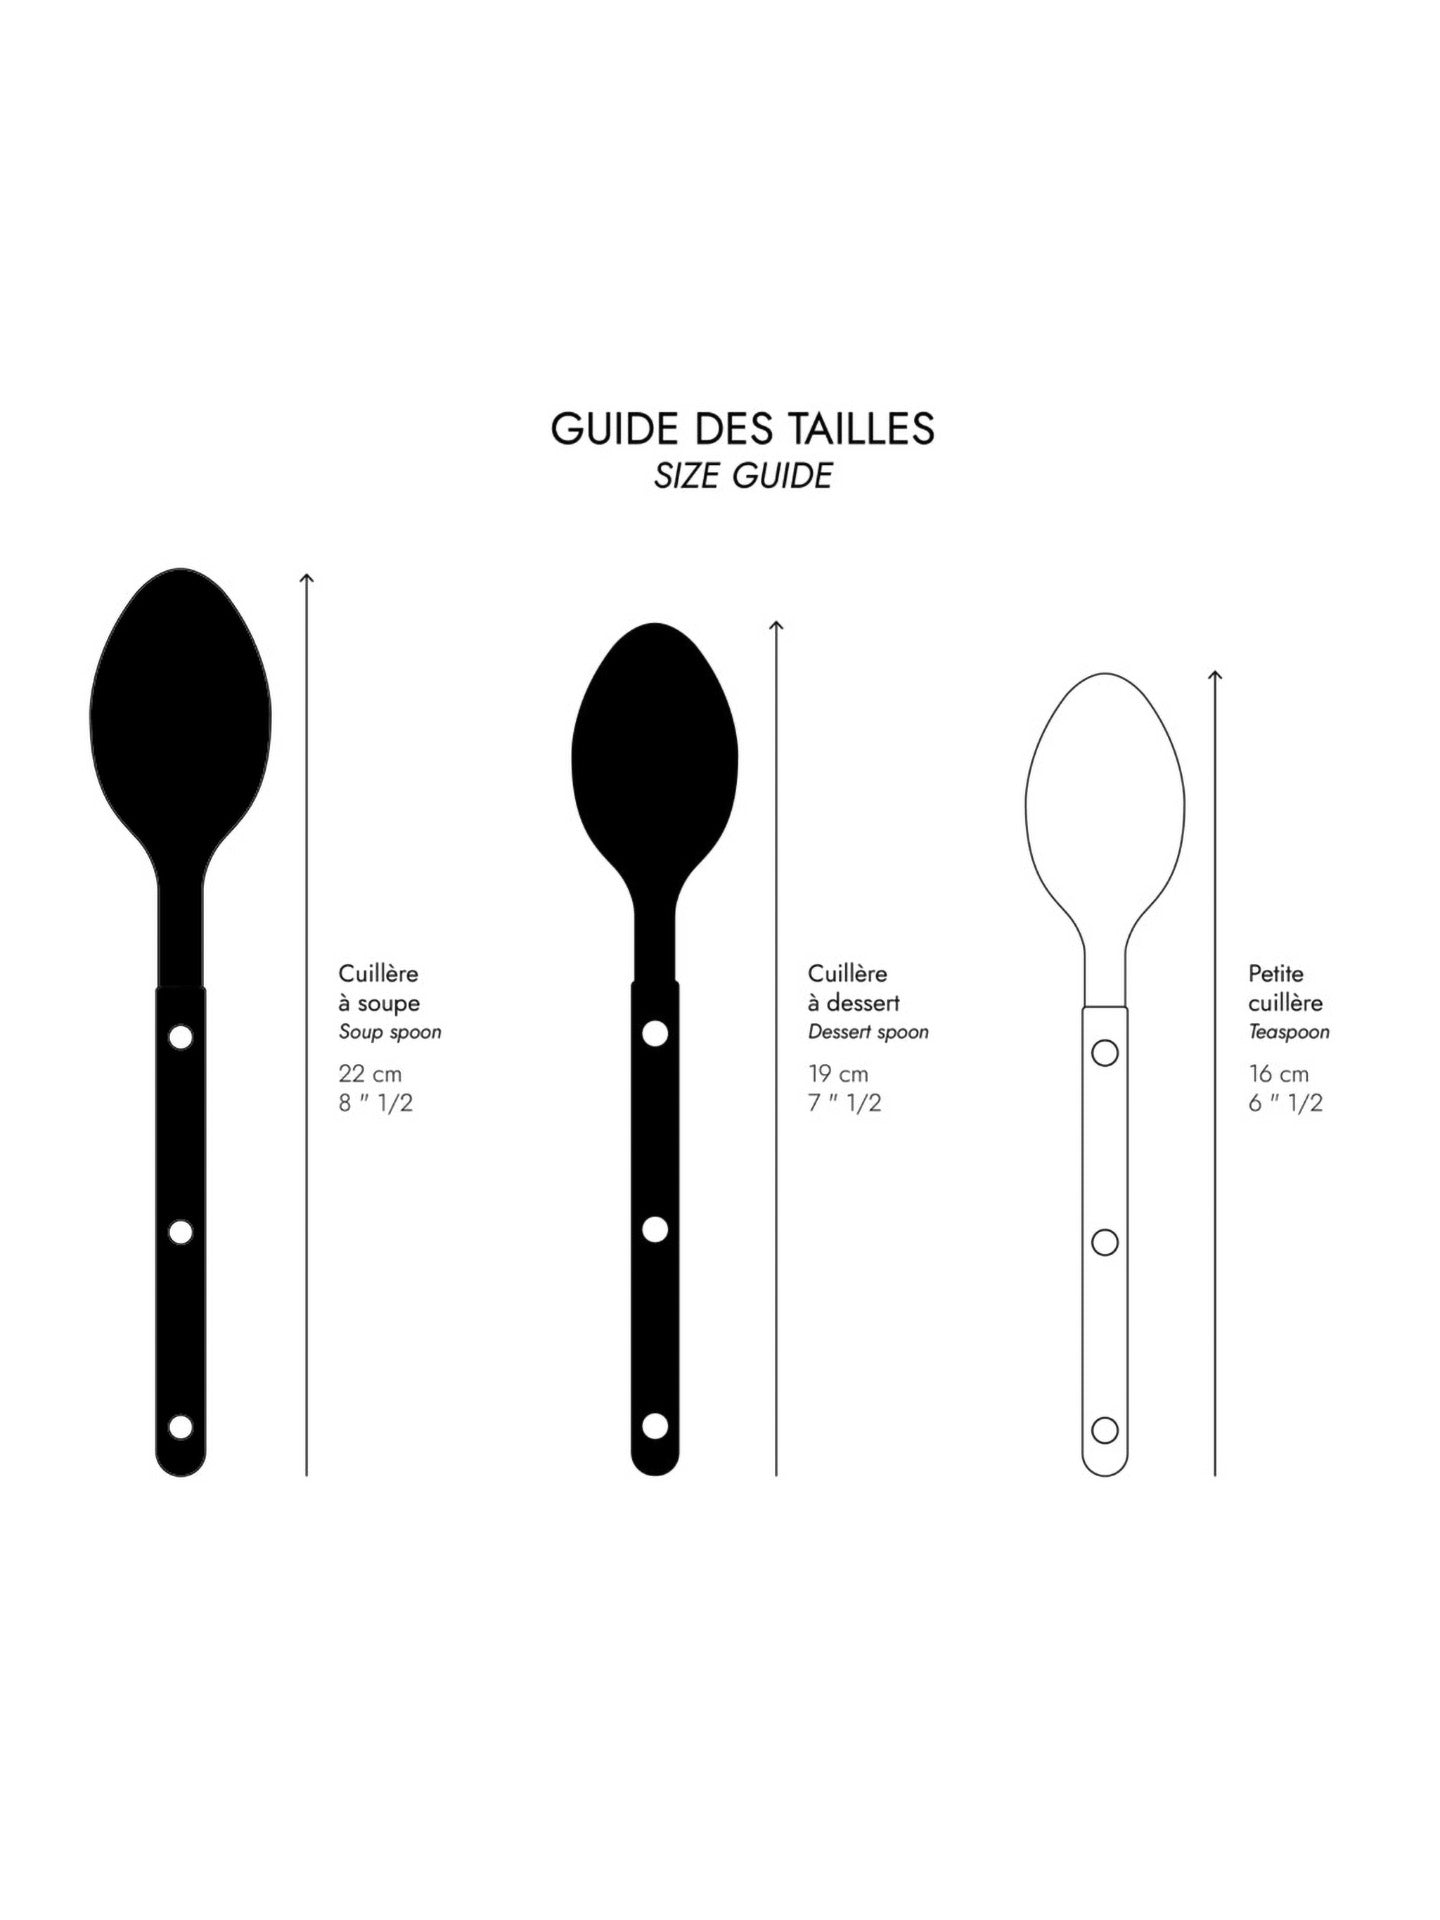 The Bistrot tea spoon or the little spoon is just 16 cm tall. It's made from stainless steel and the acrylic handle in the is decorated with stainless steel rivets. 